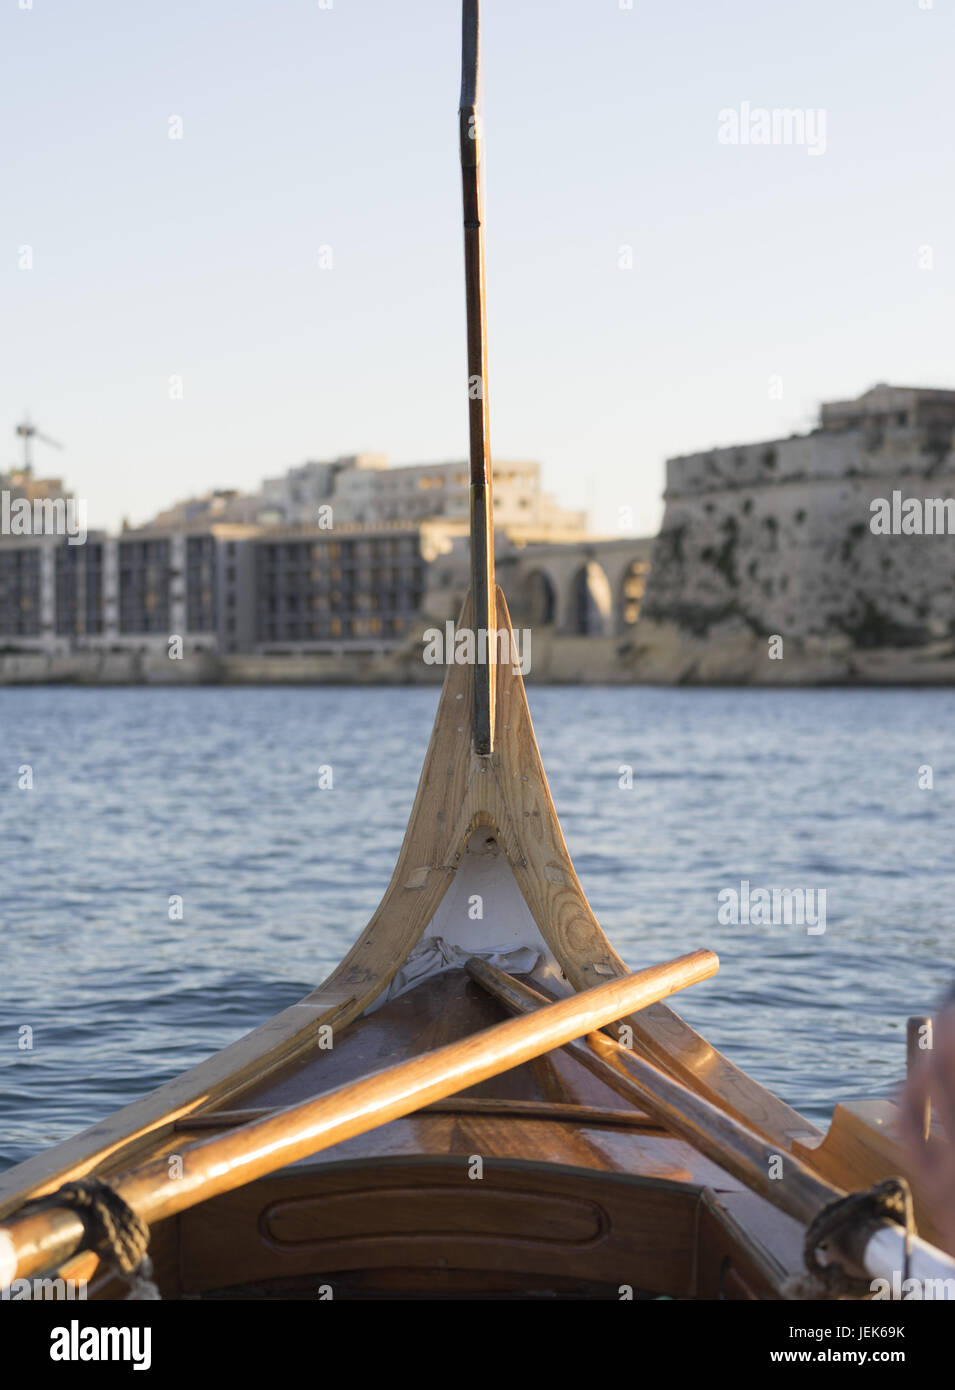 traditional Maltese wooden boat Stock Photo